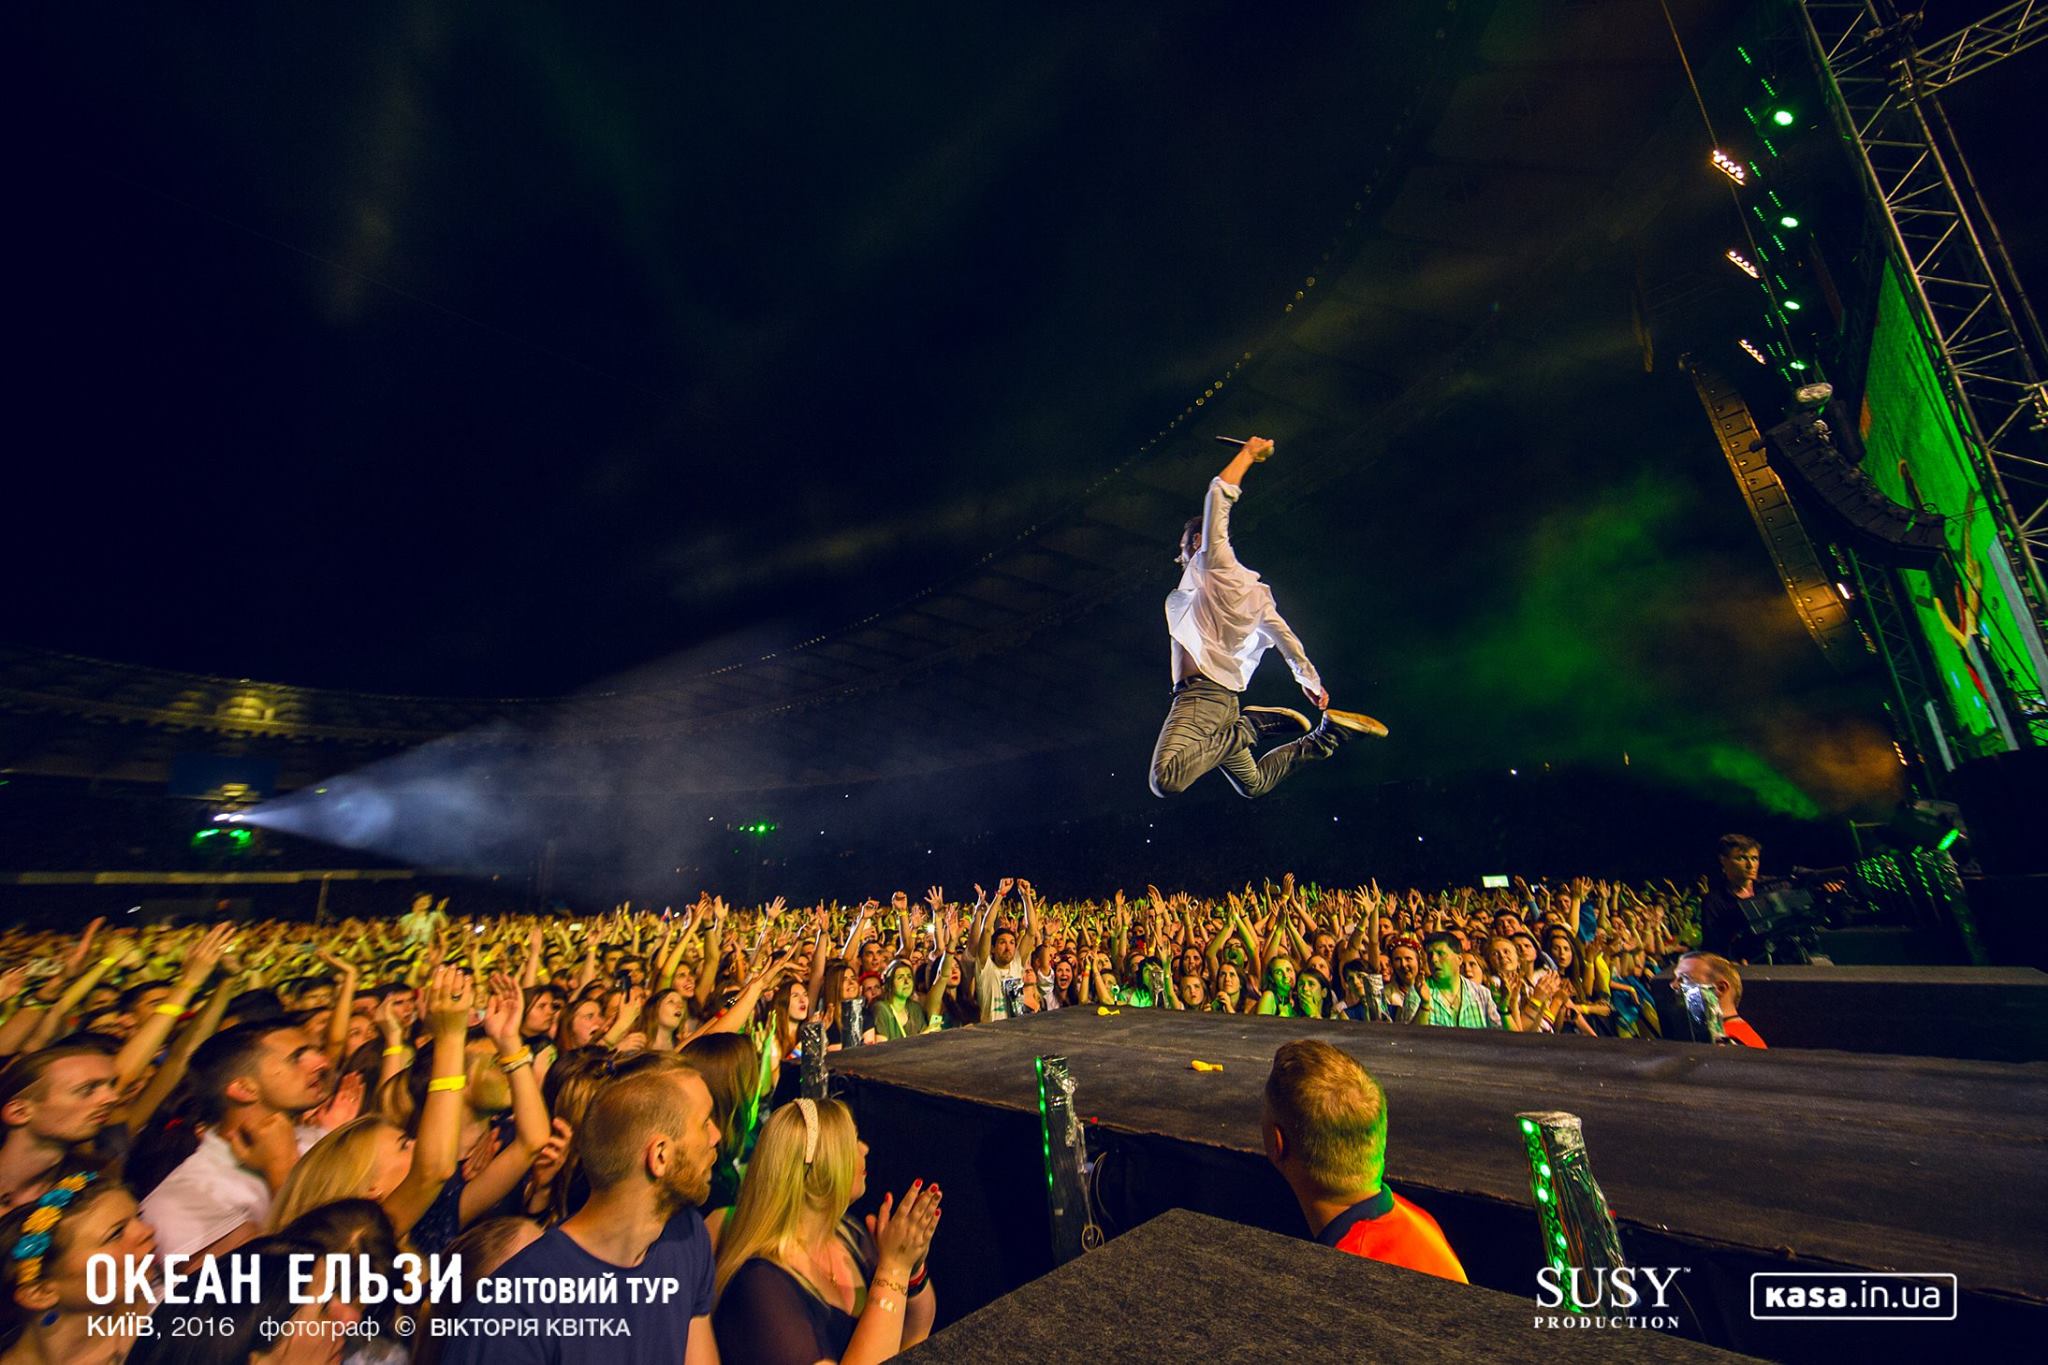 Over 85,000 attend Okean Elzy concert in Kyiv ~~